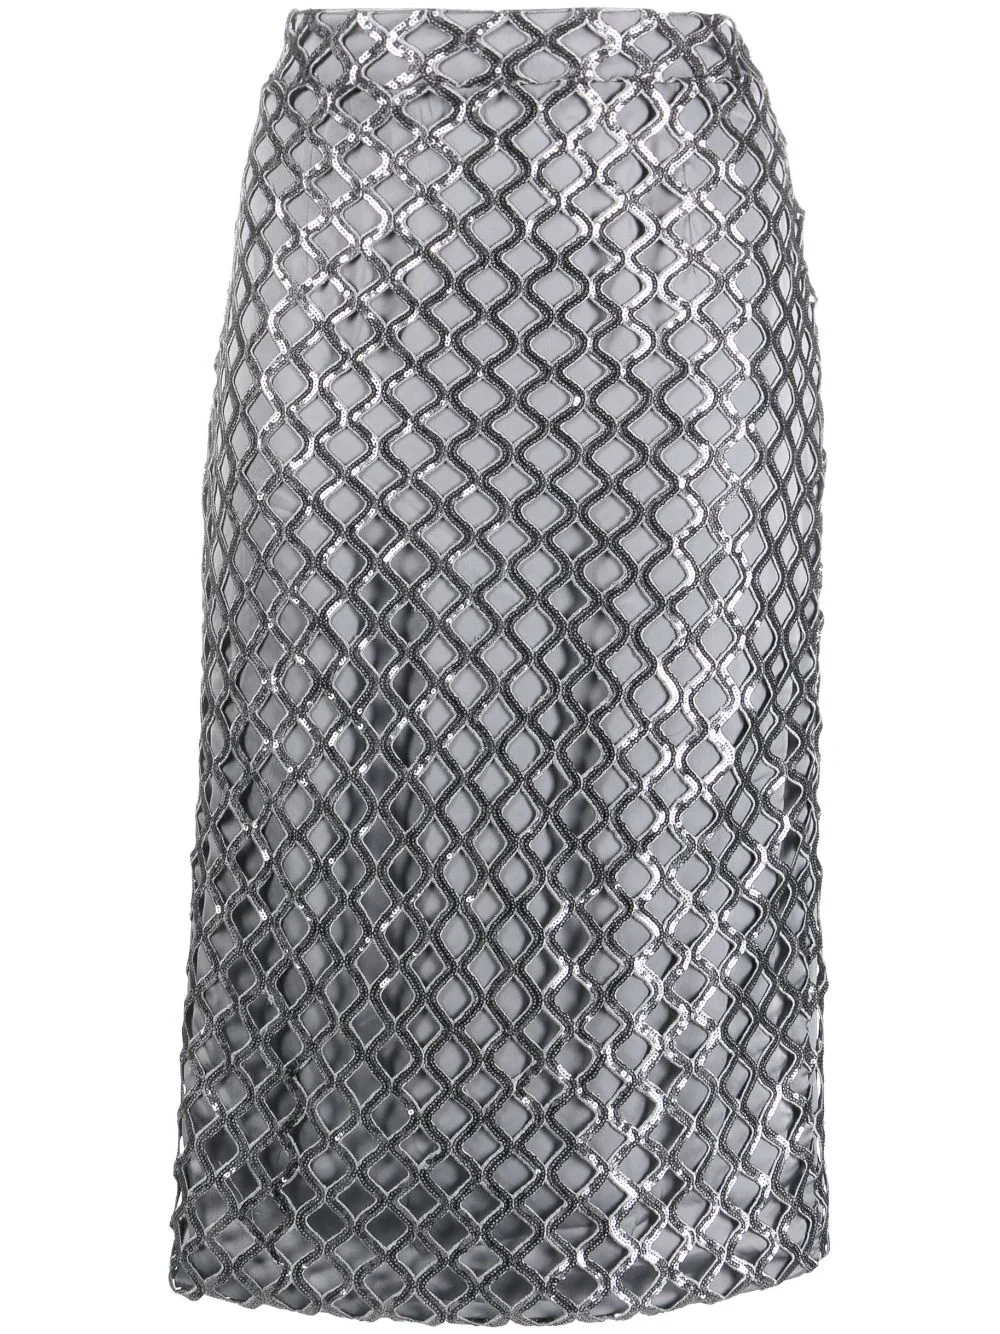 FEDERICA TOSI MIDI SKIRT EMBELLISHED WITH SEQUINS